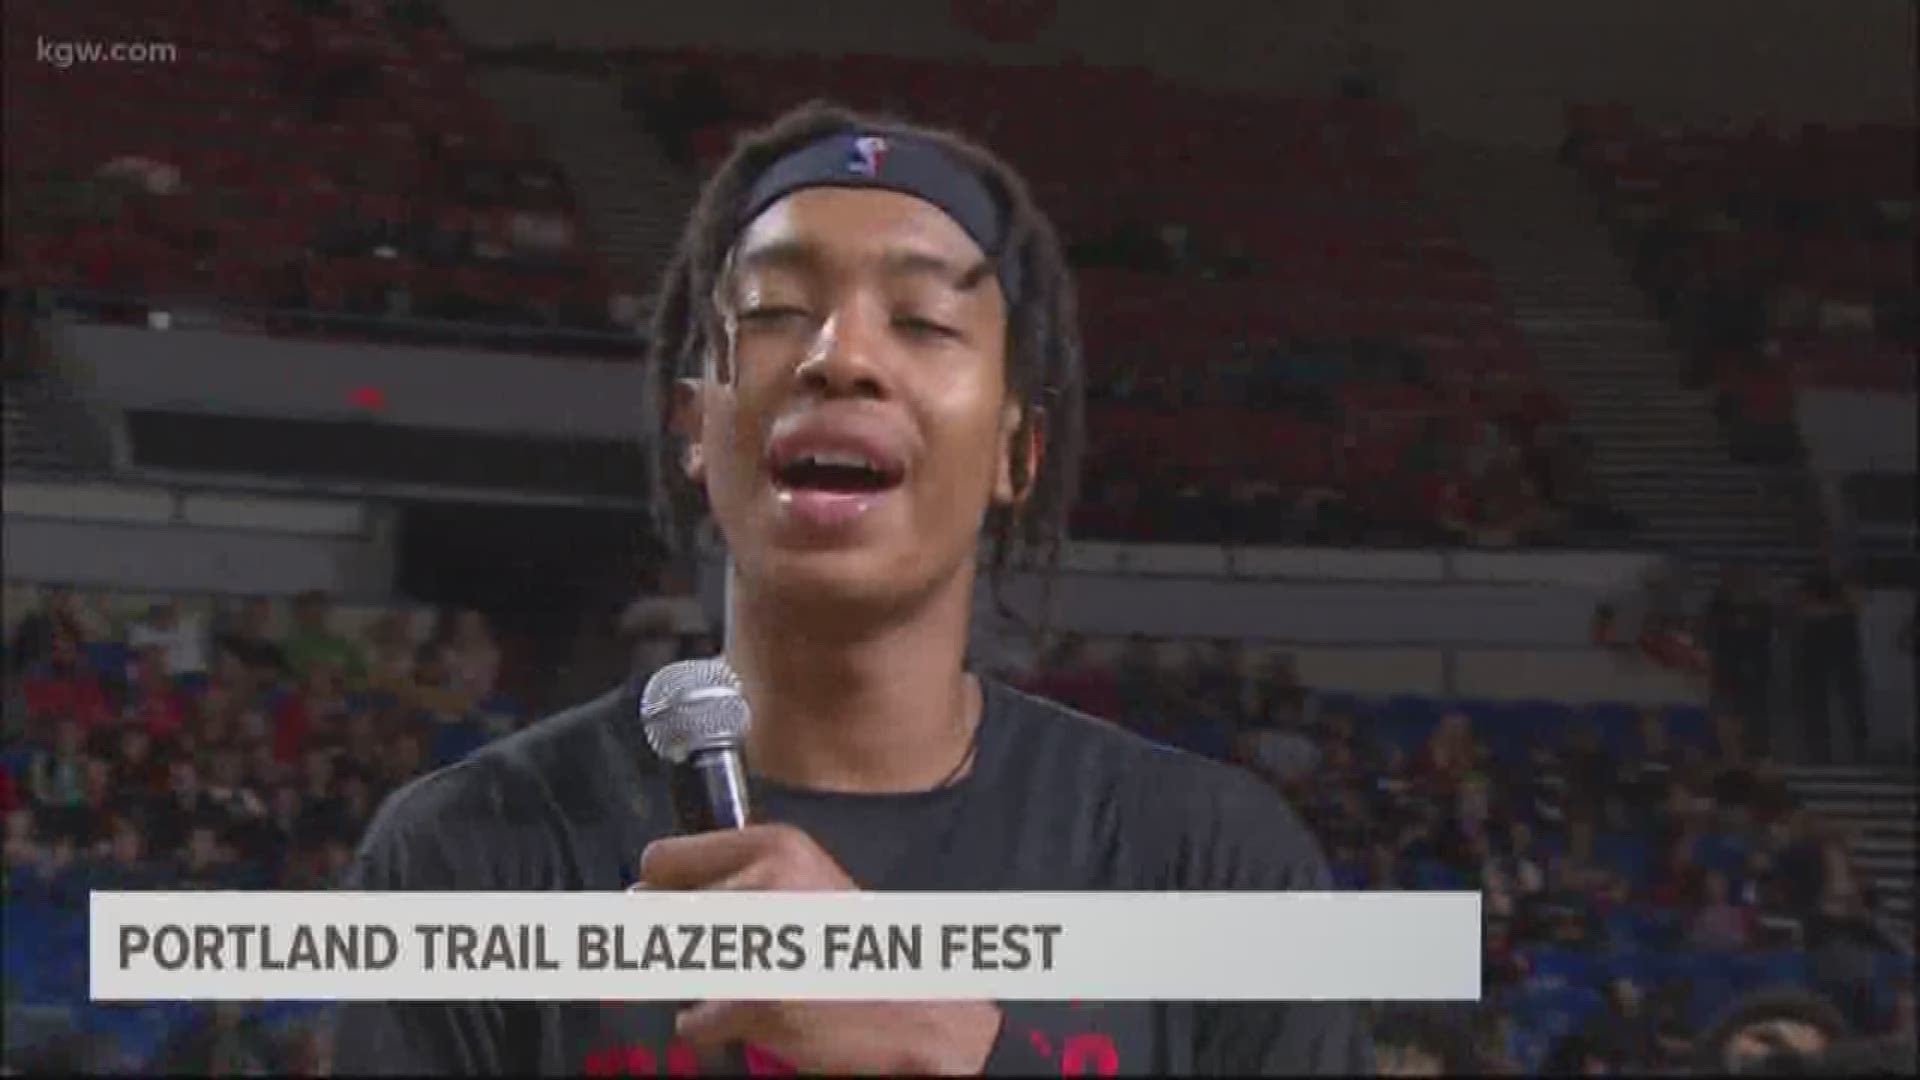 Damian Lillard made rookies sing at the Blazers Fan Fest, including a less than stellar performance by Moses Brown.